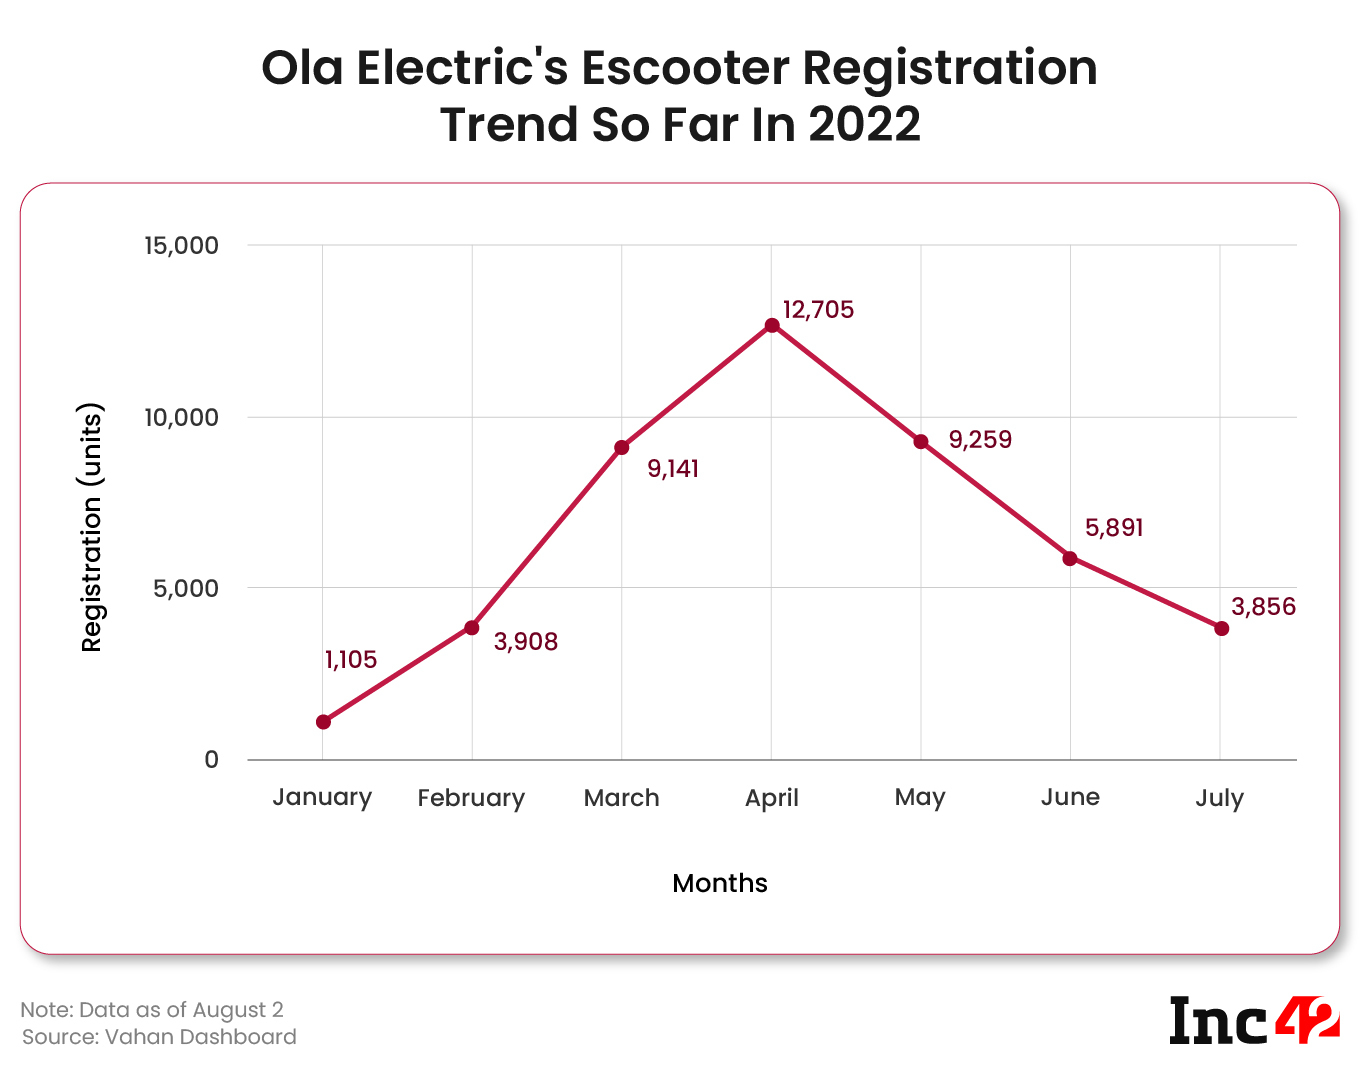 Ola Electric's Escooter Registration Trend So Far In 2022